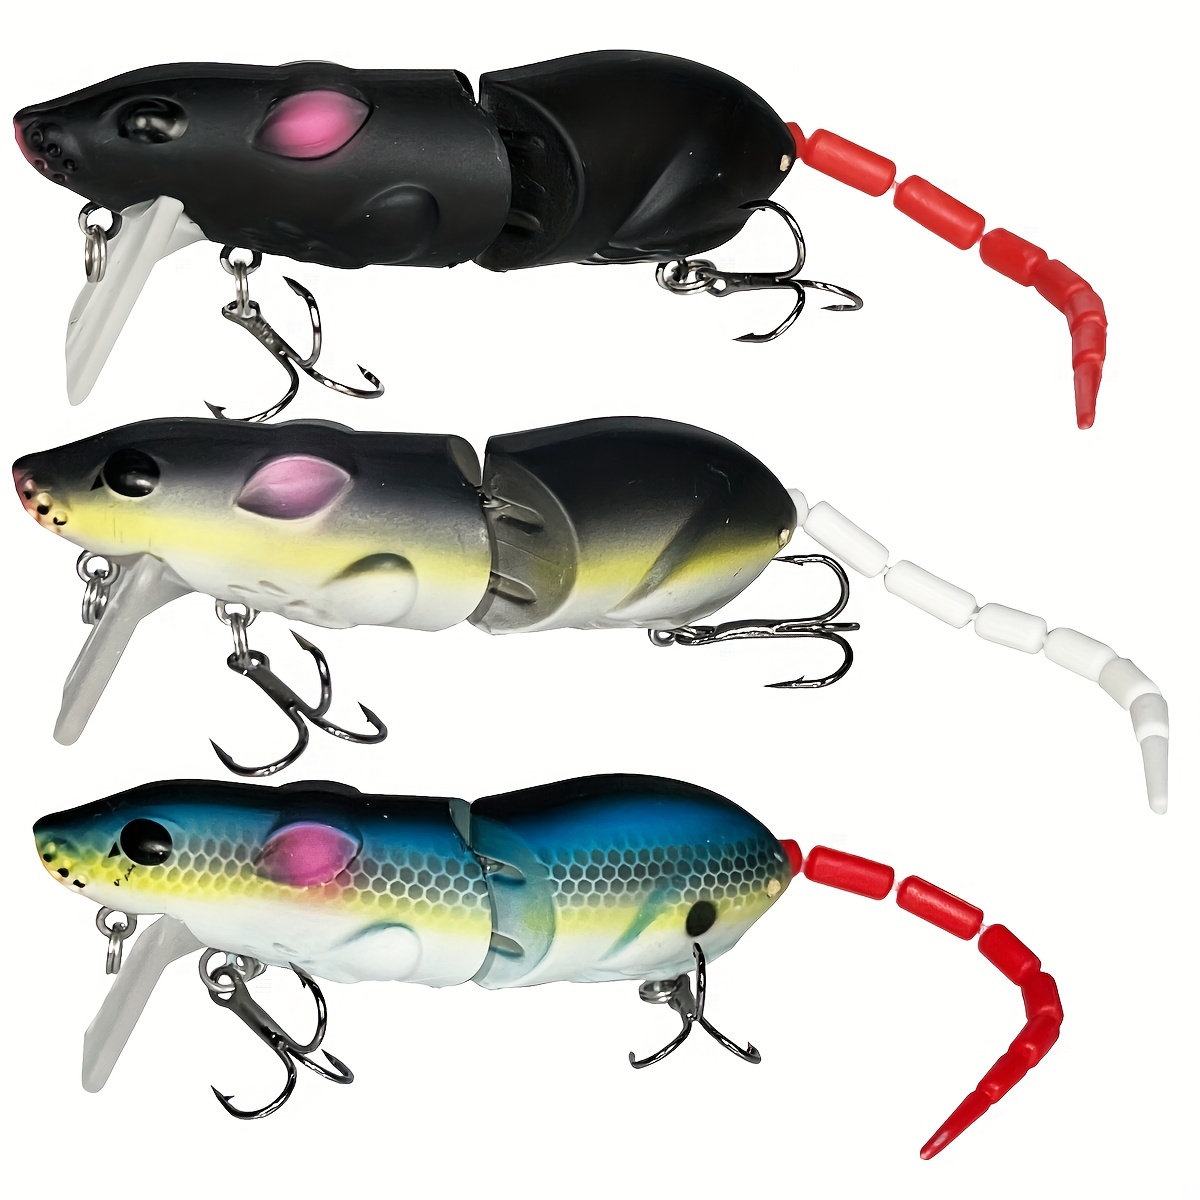 3Pcs Topwater Frog Duck Fishing Lures Kit for Bass Whopper Plopper  Crankbaits with Rotating Tail Propeller Tractor for Bass